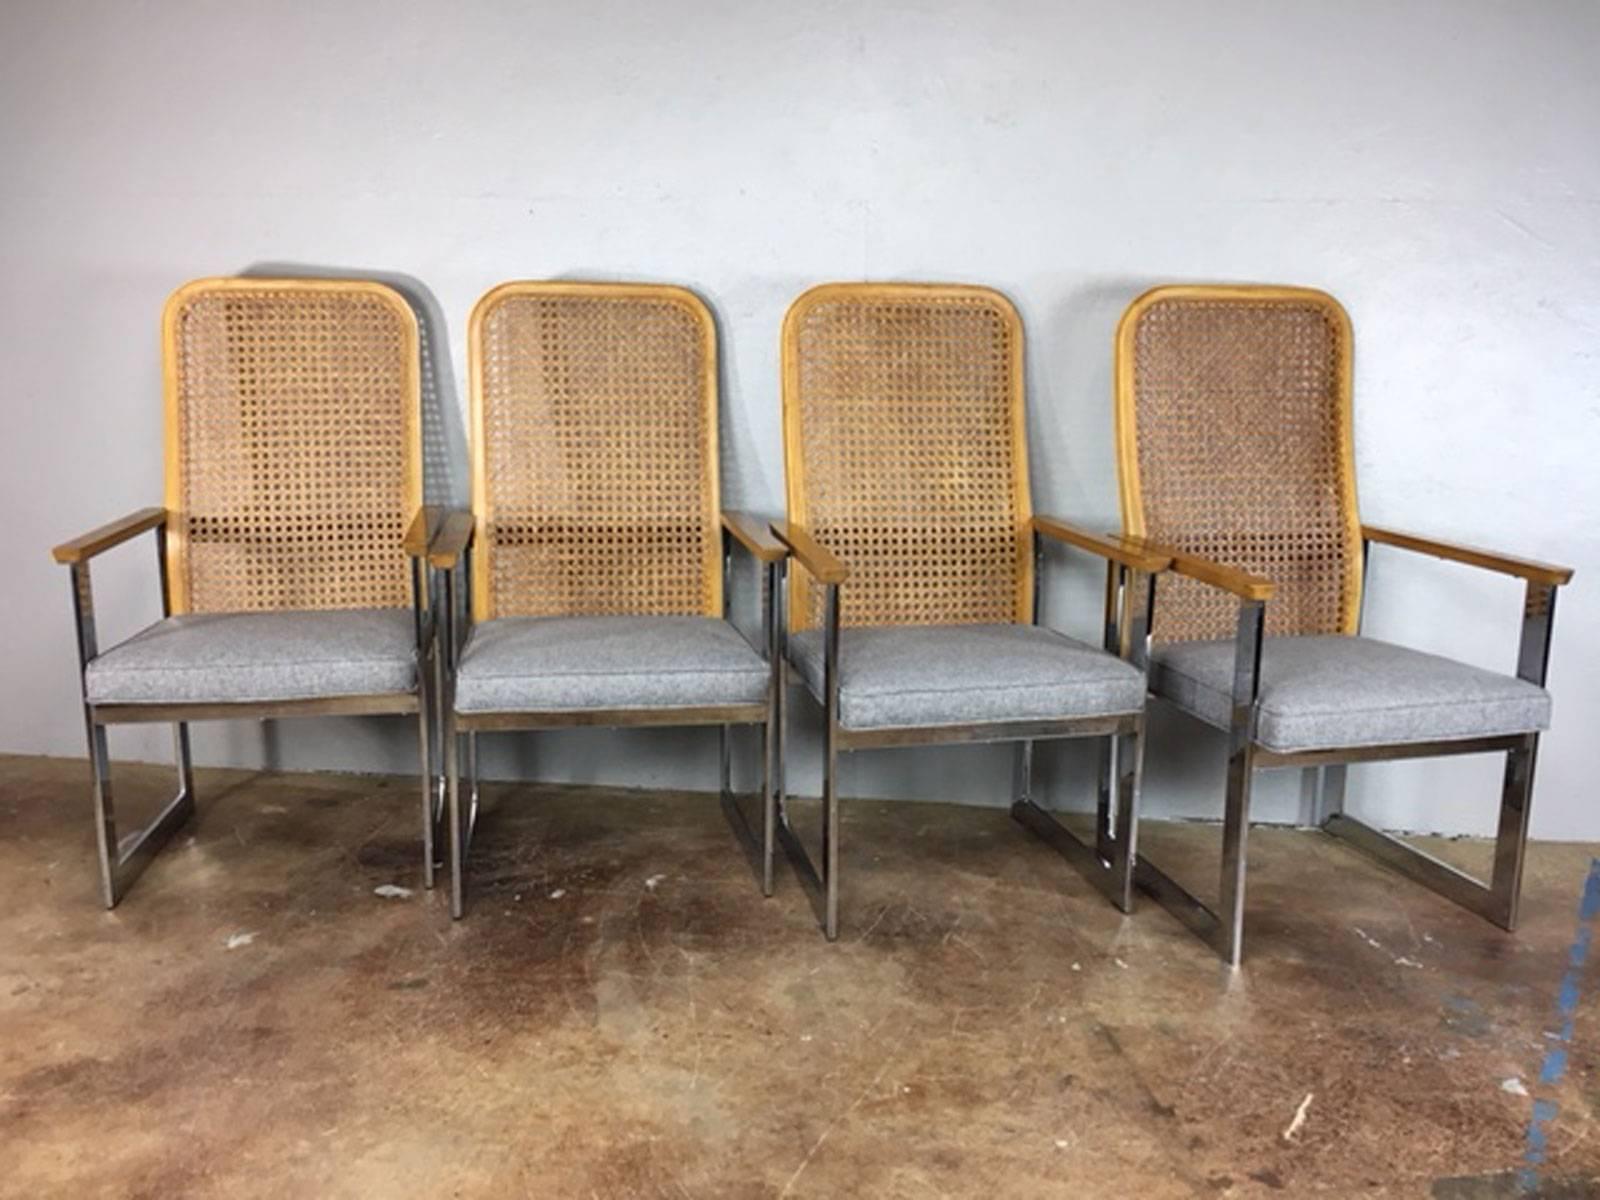 Unique set of four Milo Baughman cane back and chrome dining chairs. Reupholstered in a new, soft, luxurious, and long wearing and easy to clean 100% polyester modern grey fabric. Seat height is 17 inches.